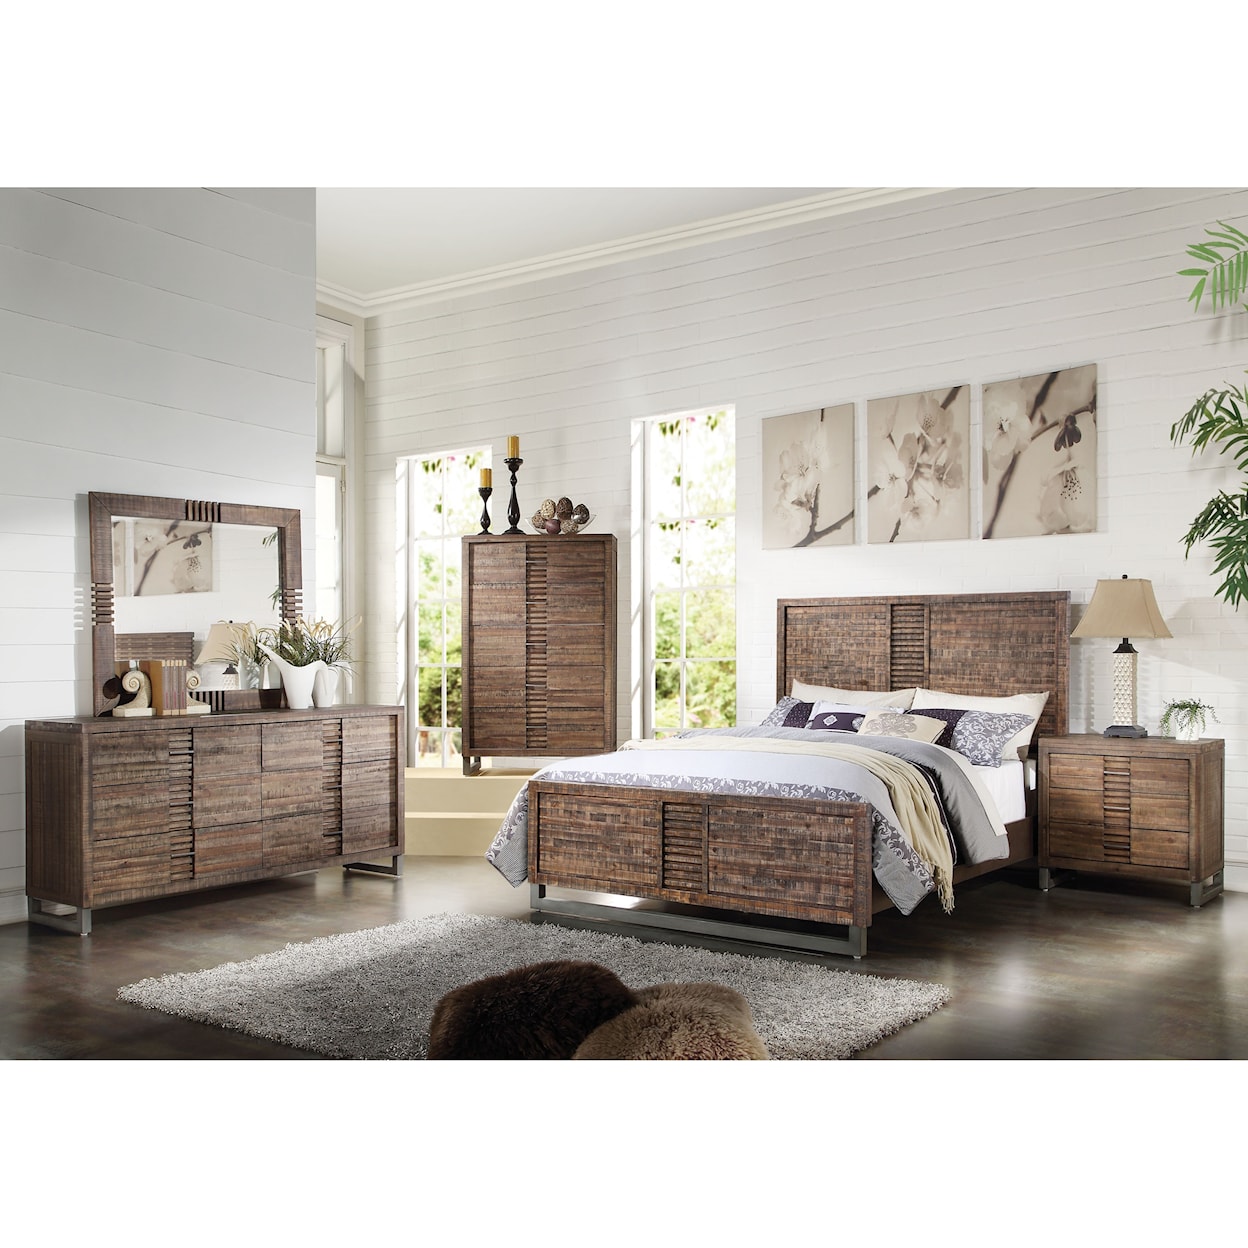 Acme Furniture Andria King Bedroom Group